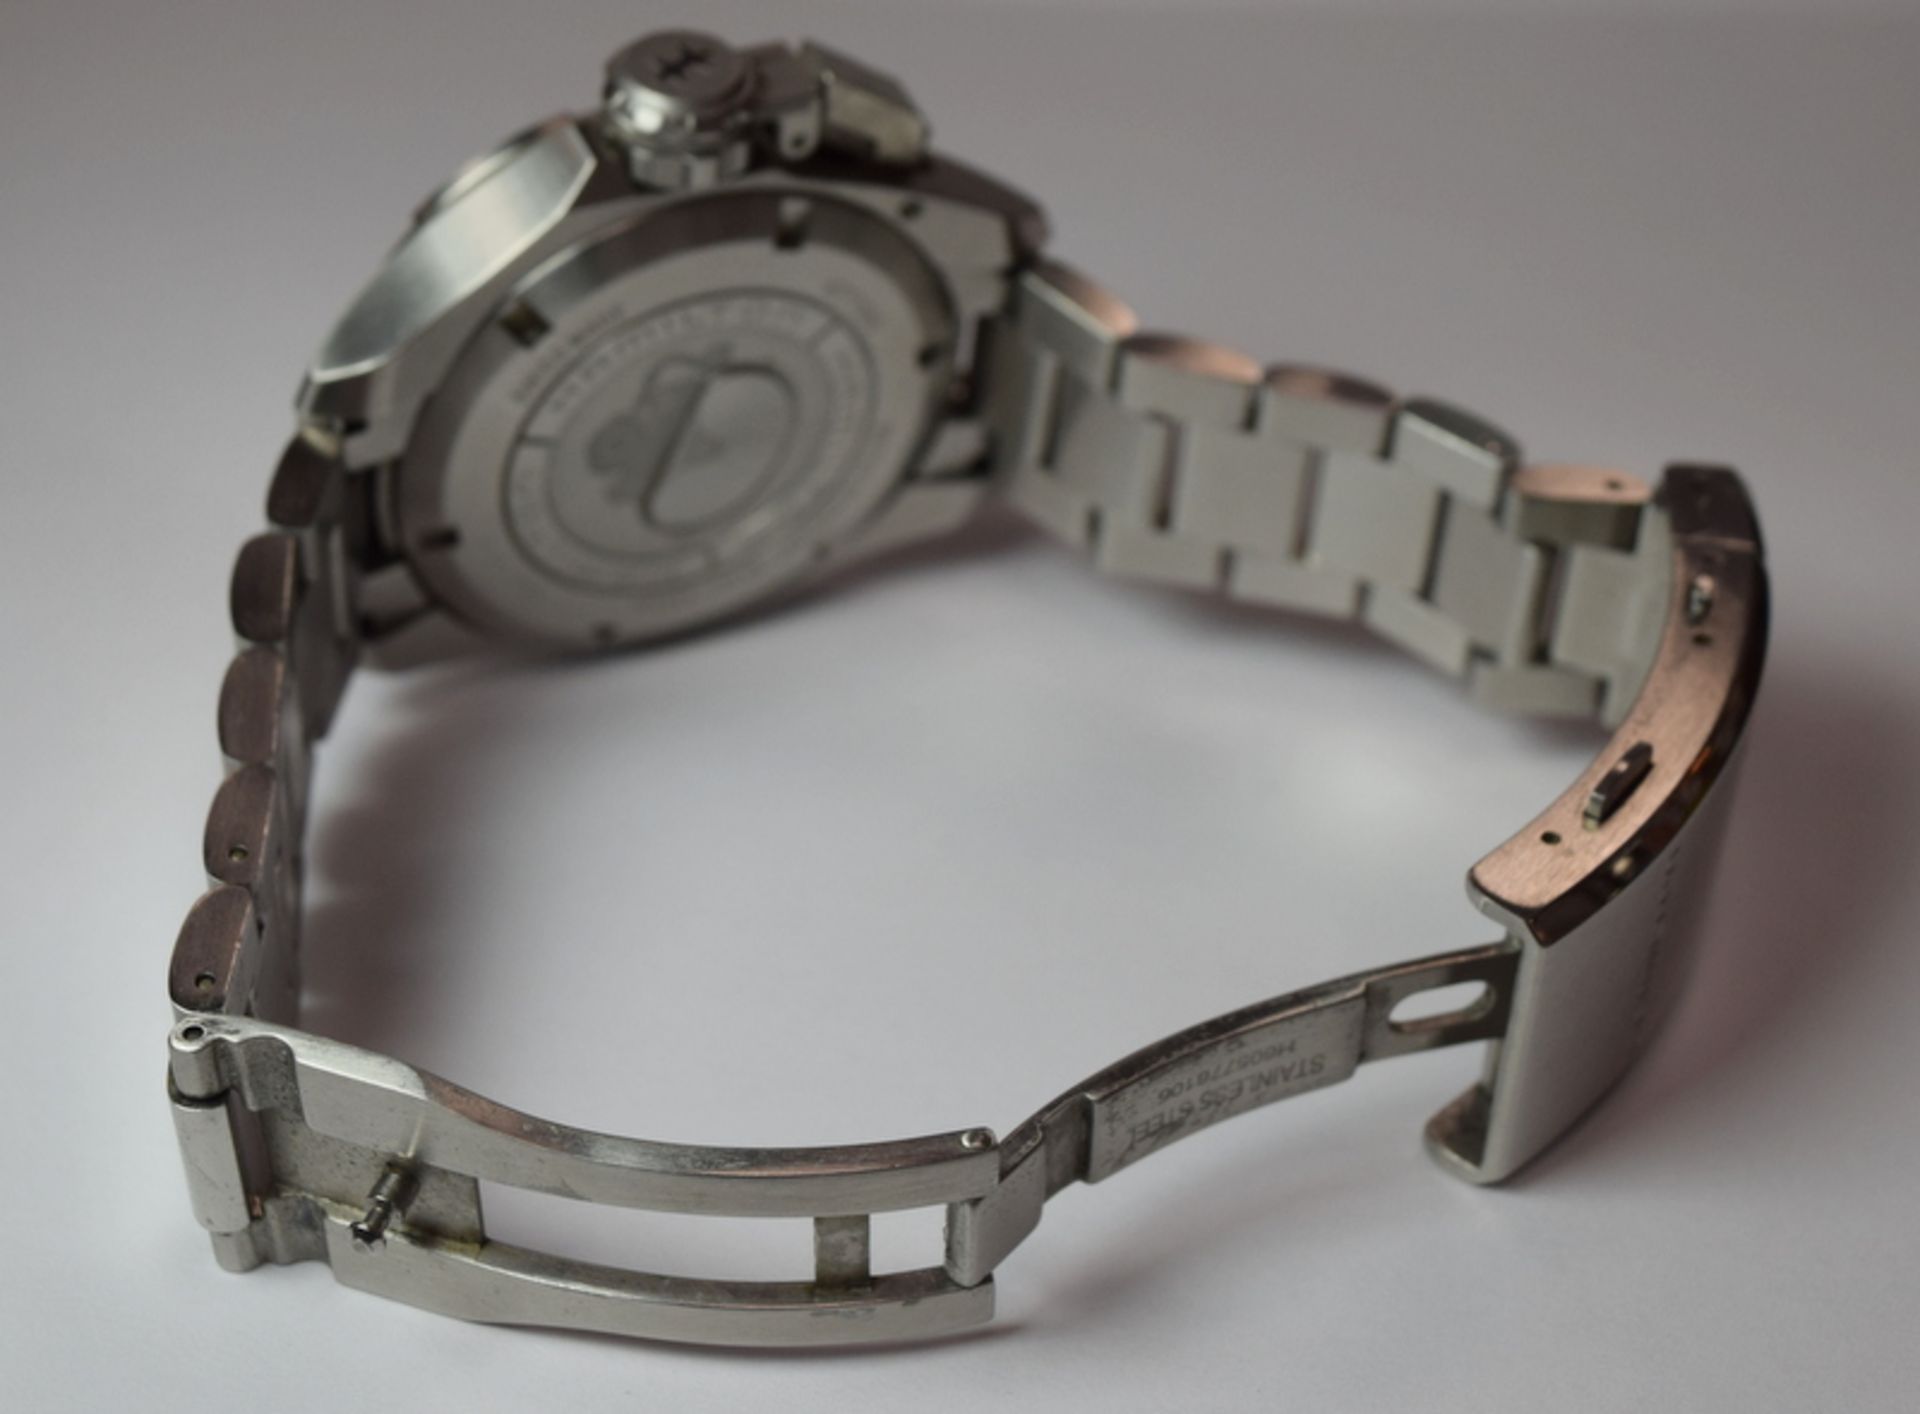 Hamilton Frogman Diver's Watch AS New - Image 5 of 6